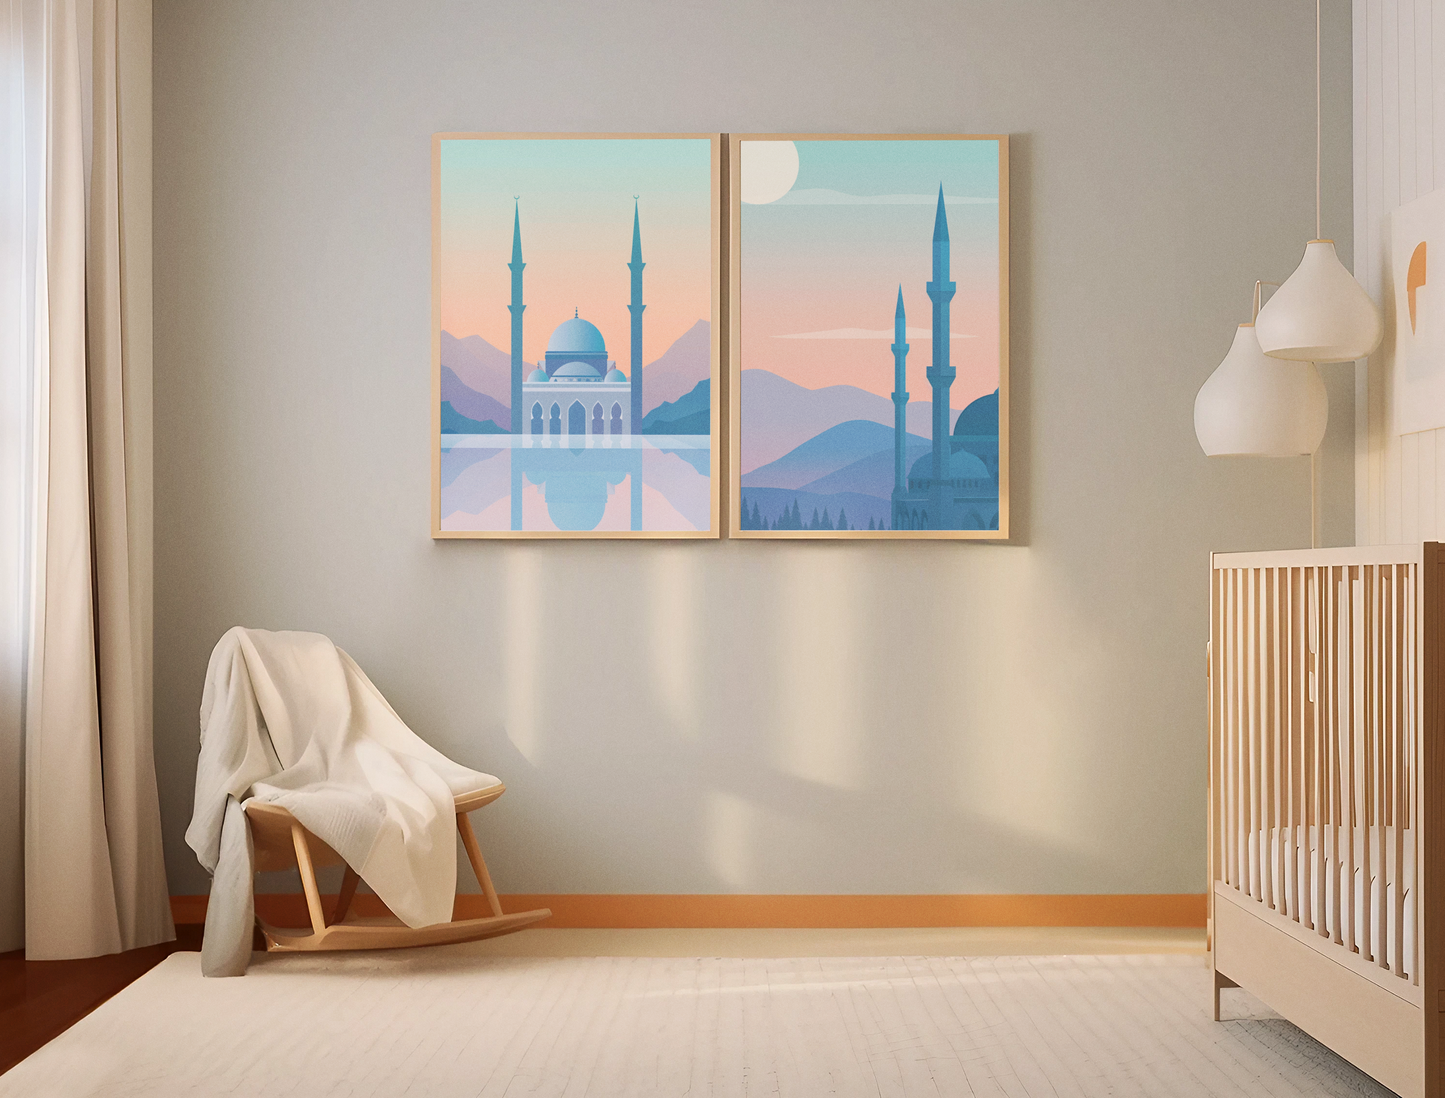 Mosque Minarets In The Mountains [11x17" Poster]